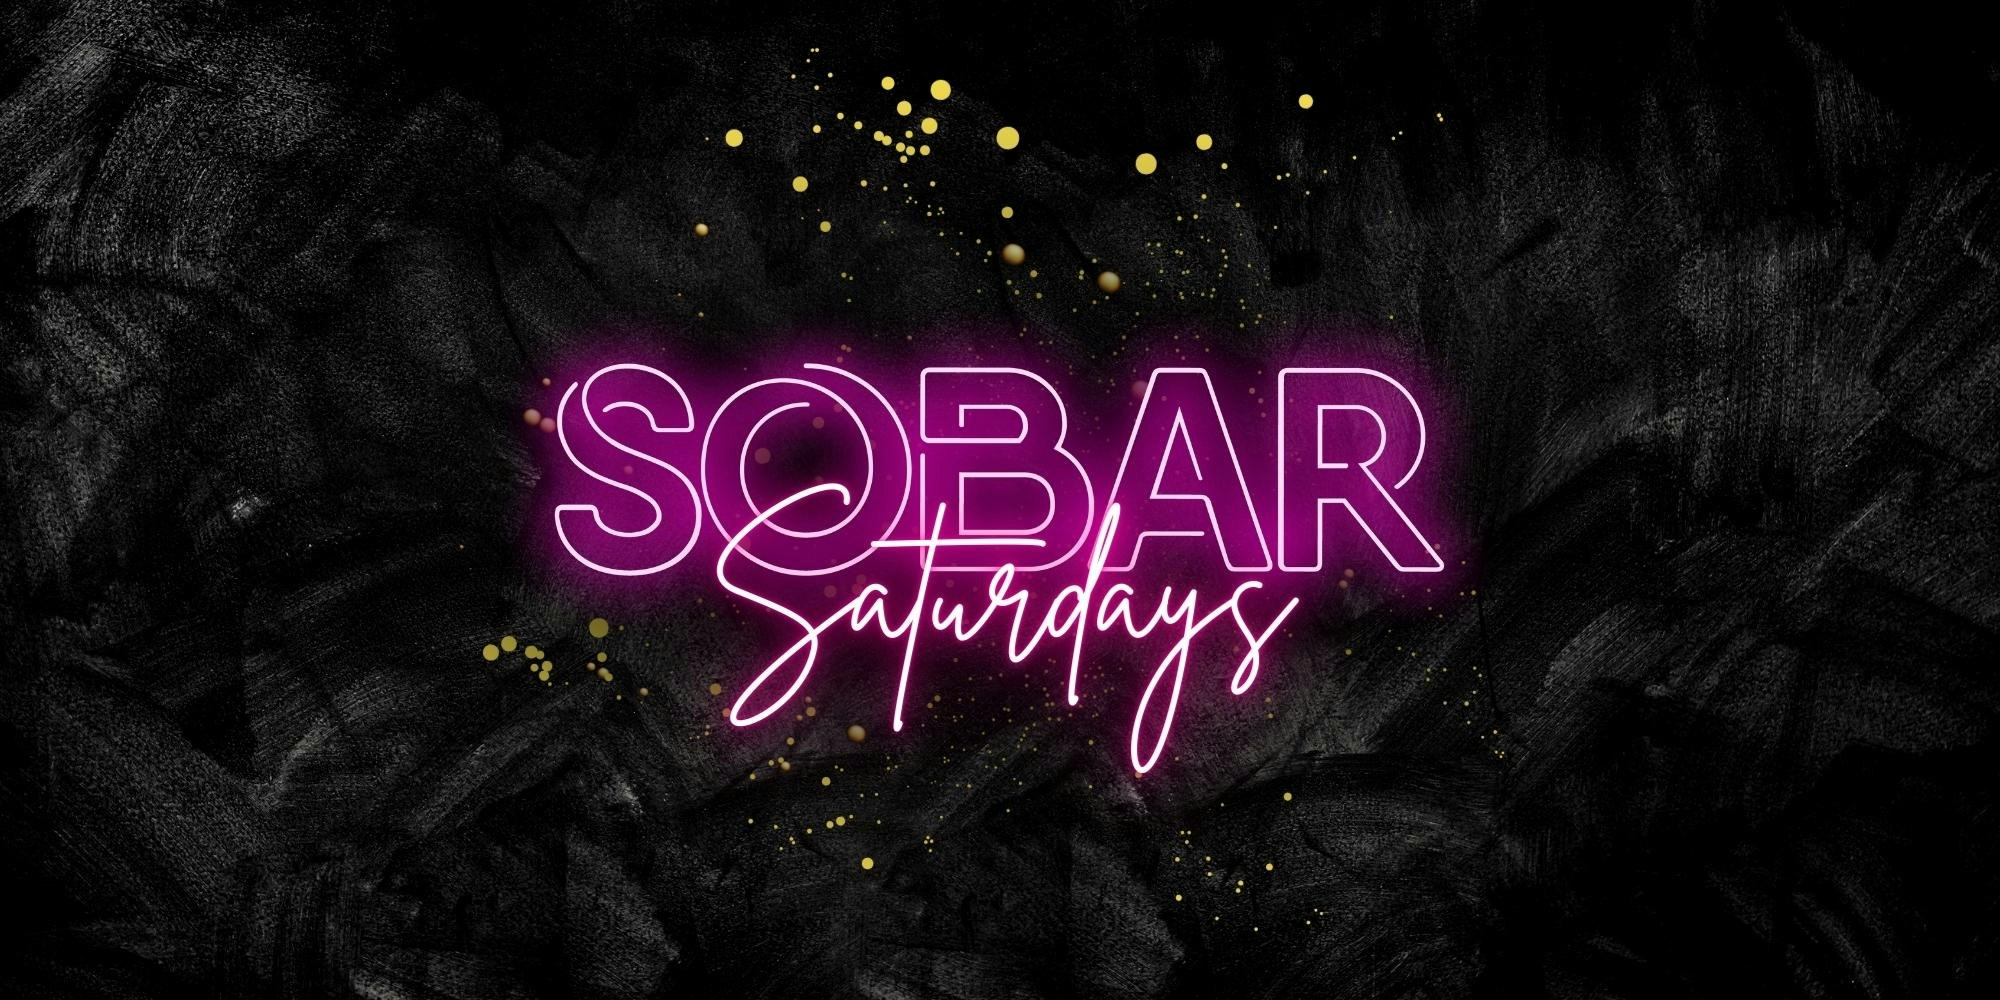 SOBAR SATURDAY – NEW YEARS EVE EVE